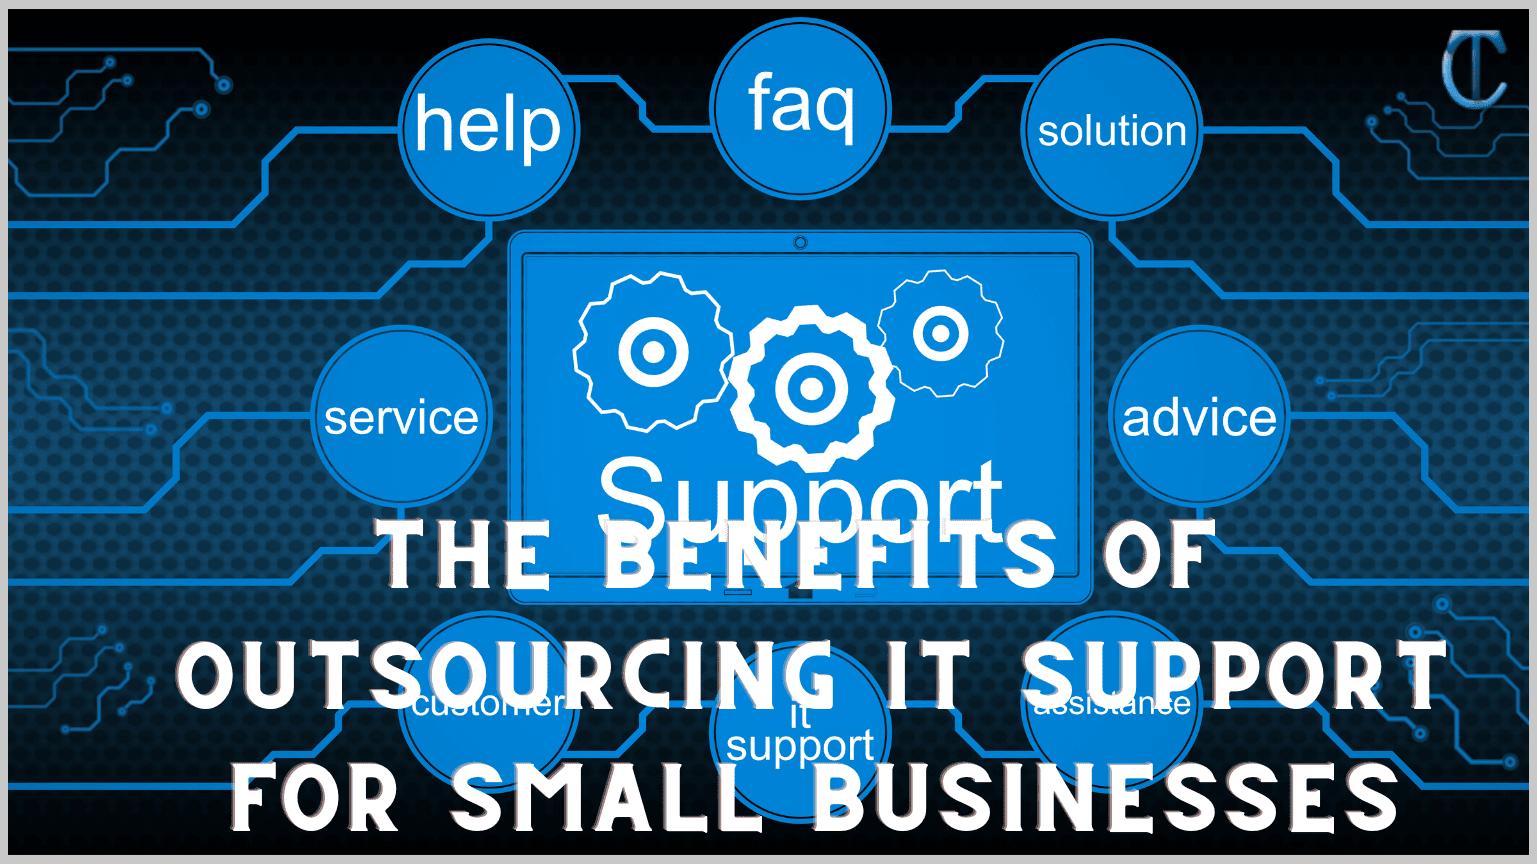 The Benefits of Outsourcing IT Support For Small Businesses